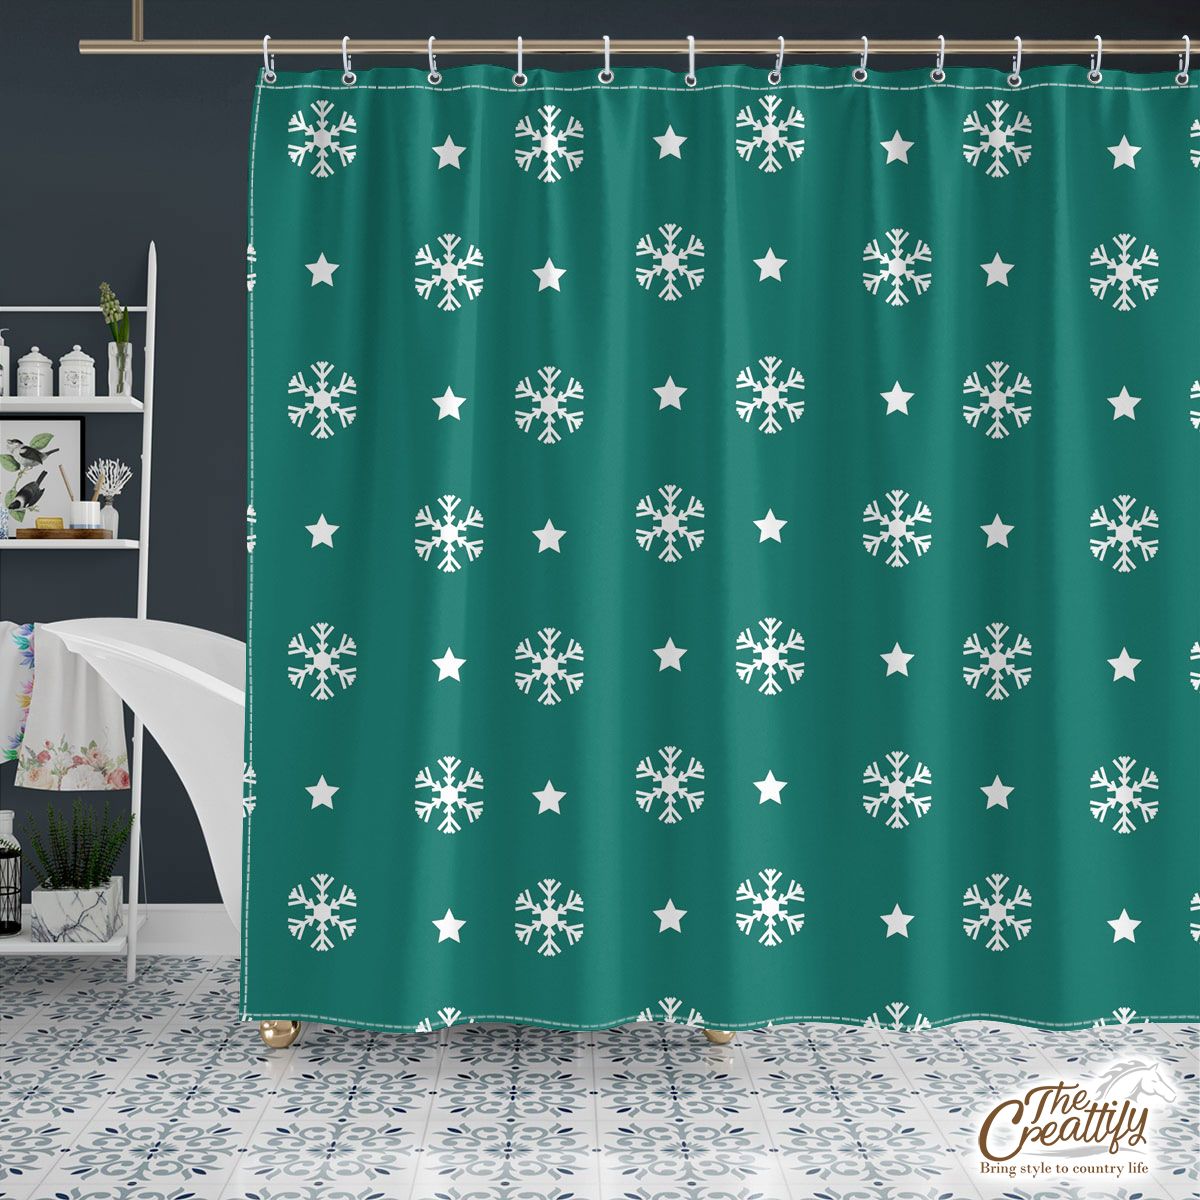 White And Dark Green Snowflake With Christmas Star Shower Curtain